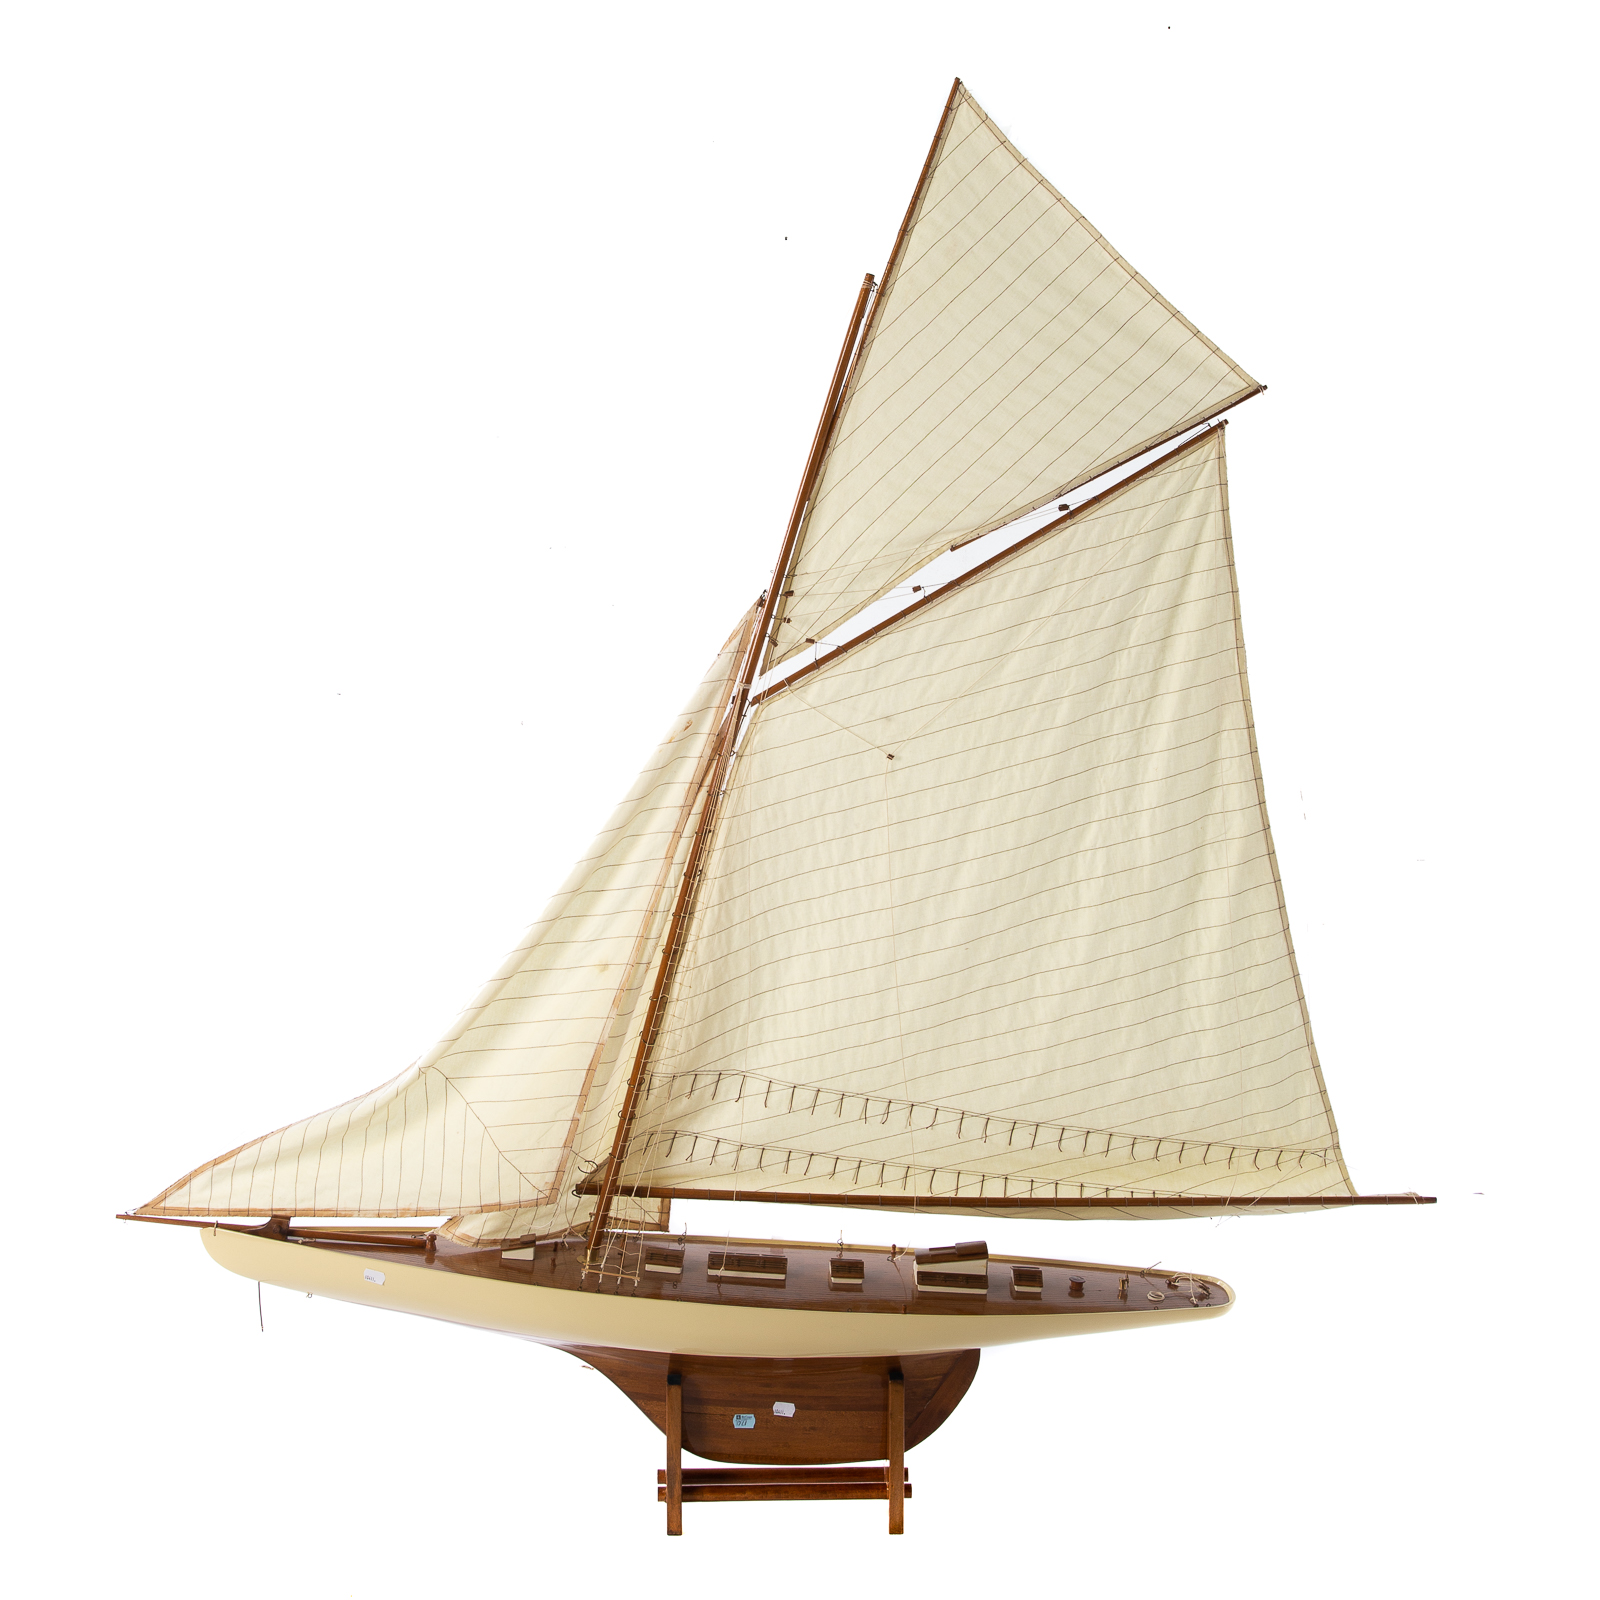 WORKING MODEL OF AMERICAS CUP YACHT